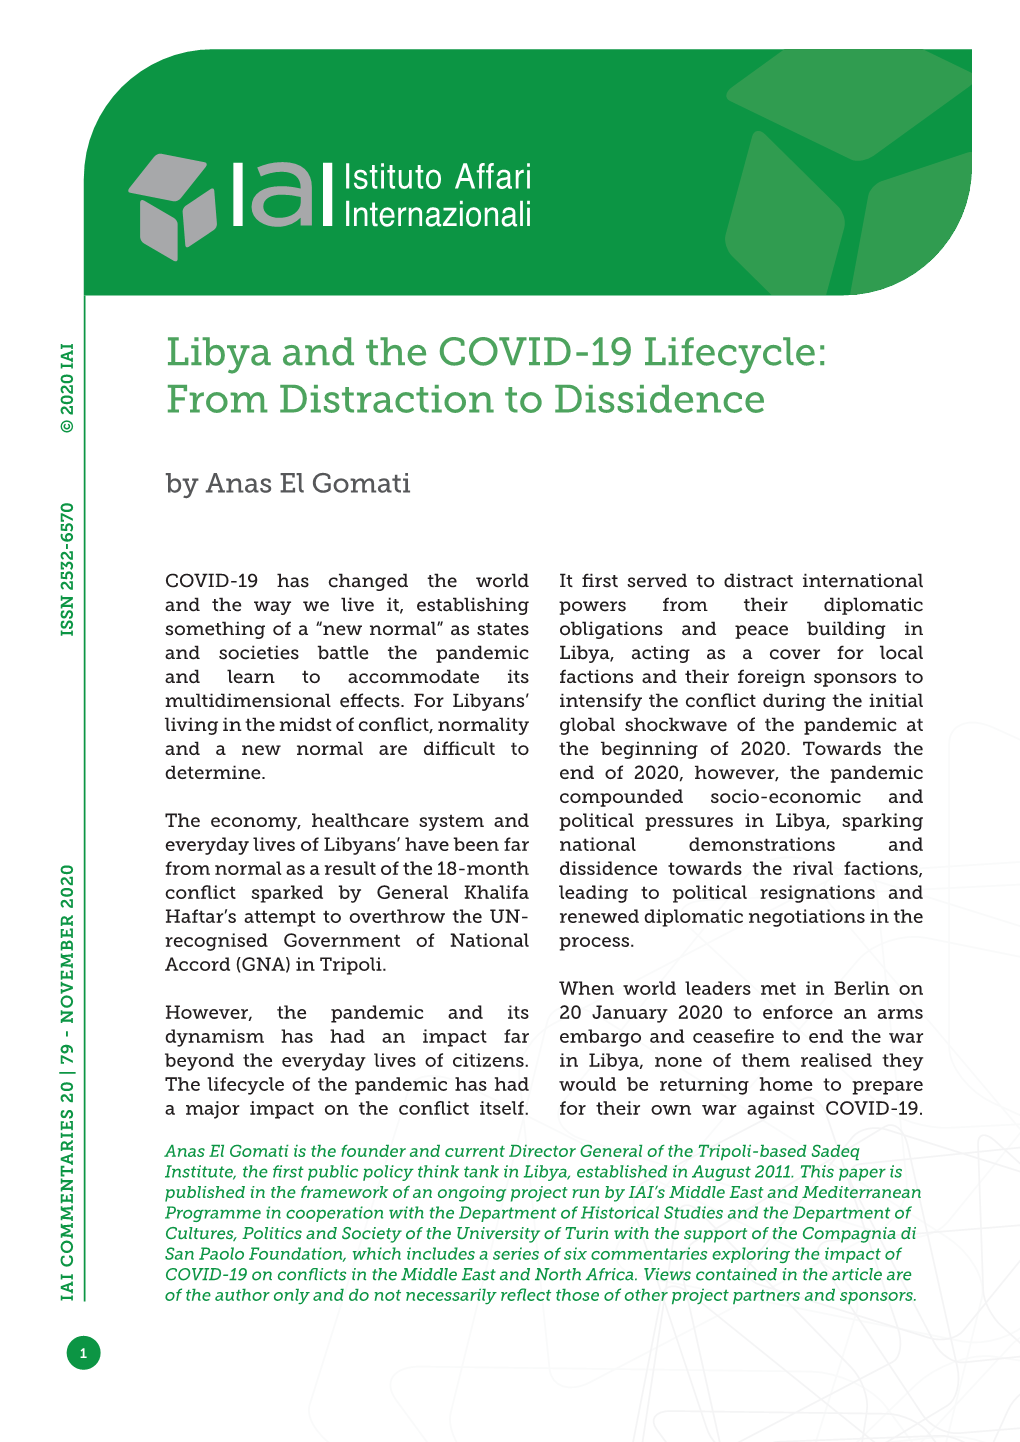 Libya and the COVID-19 Lifecycle: from Distraction to Dissidence